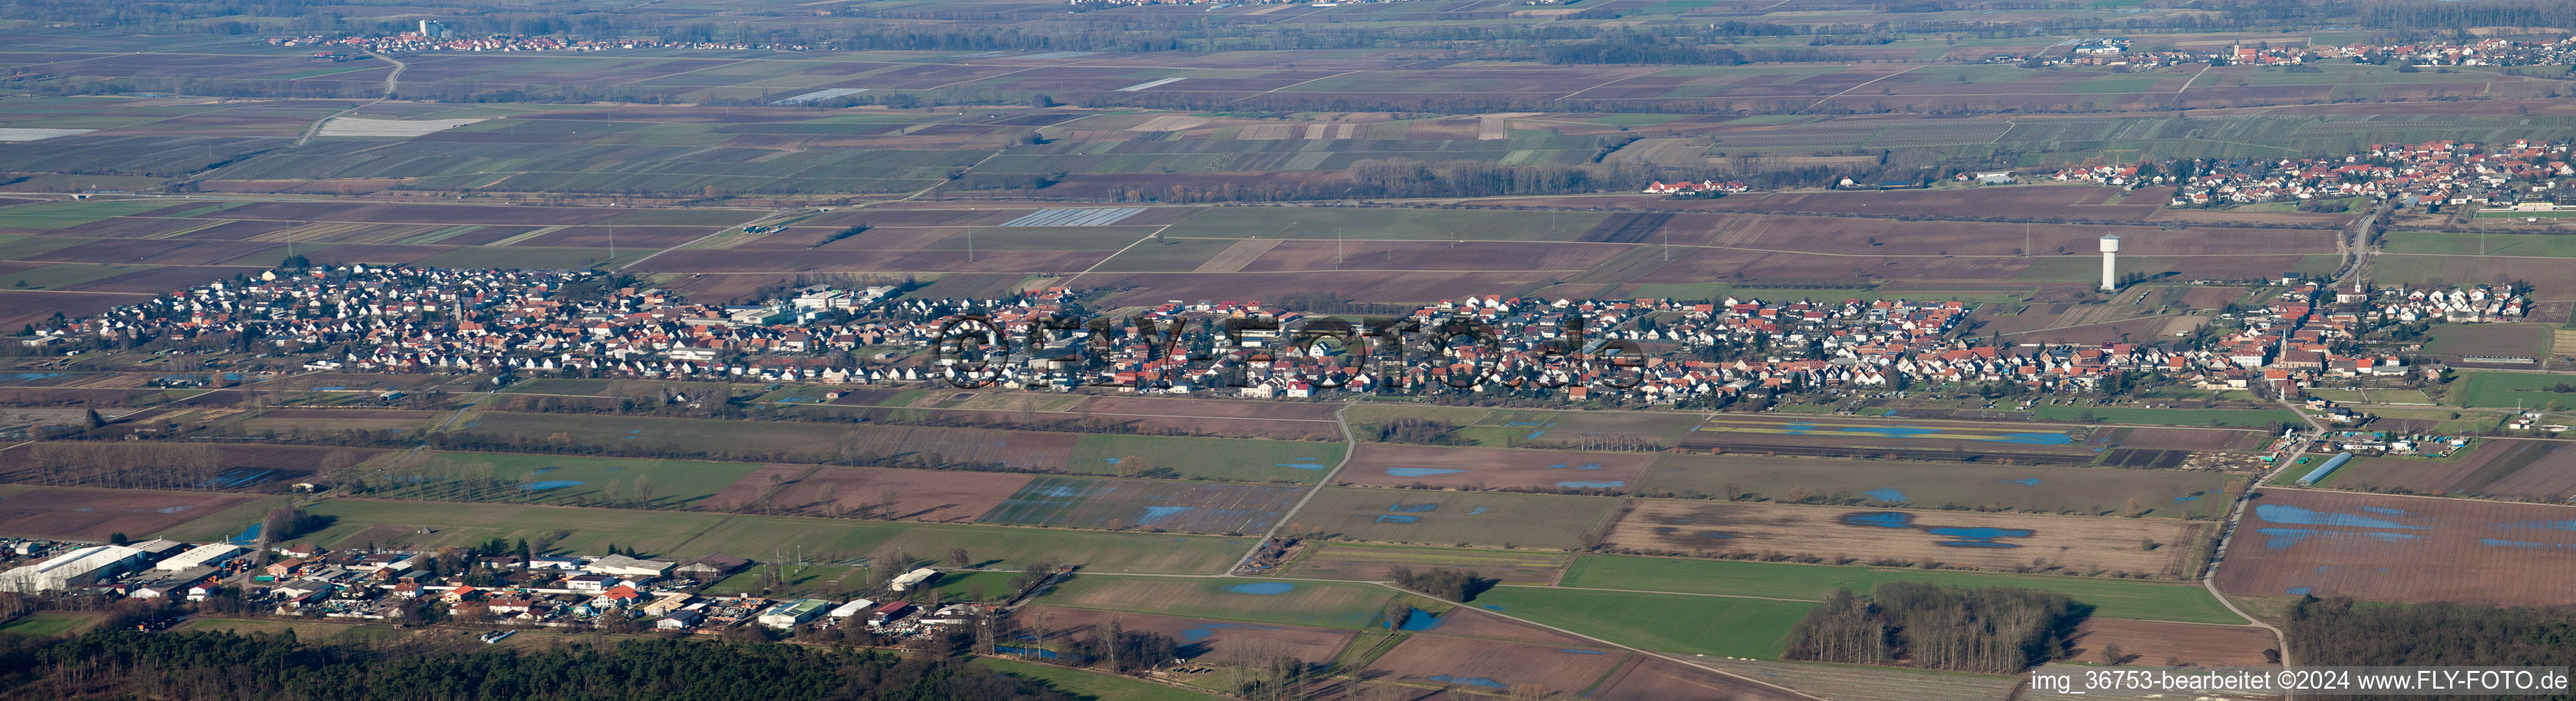 Aerial view of Panorama from the local area and environment in Lustadt in the state Rhineland-Palatinate